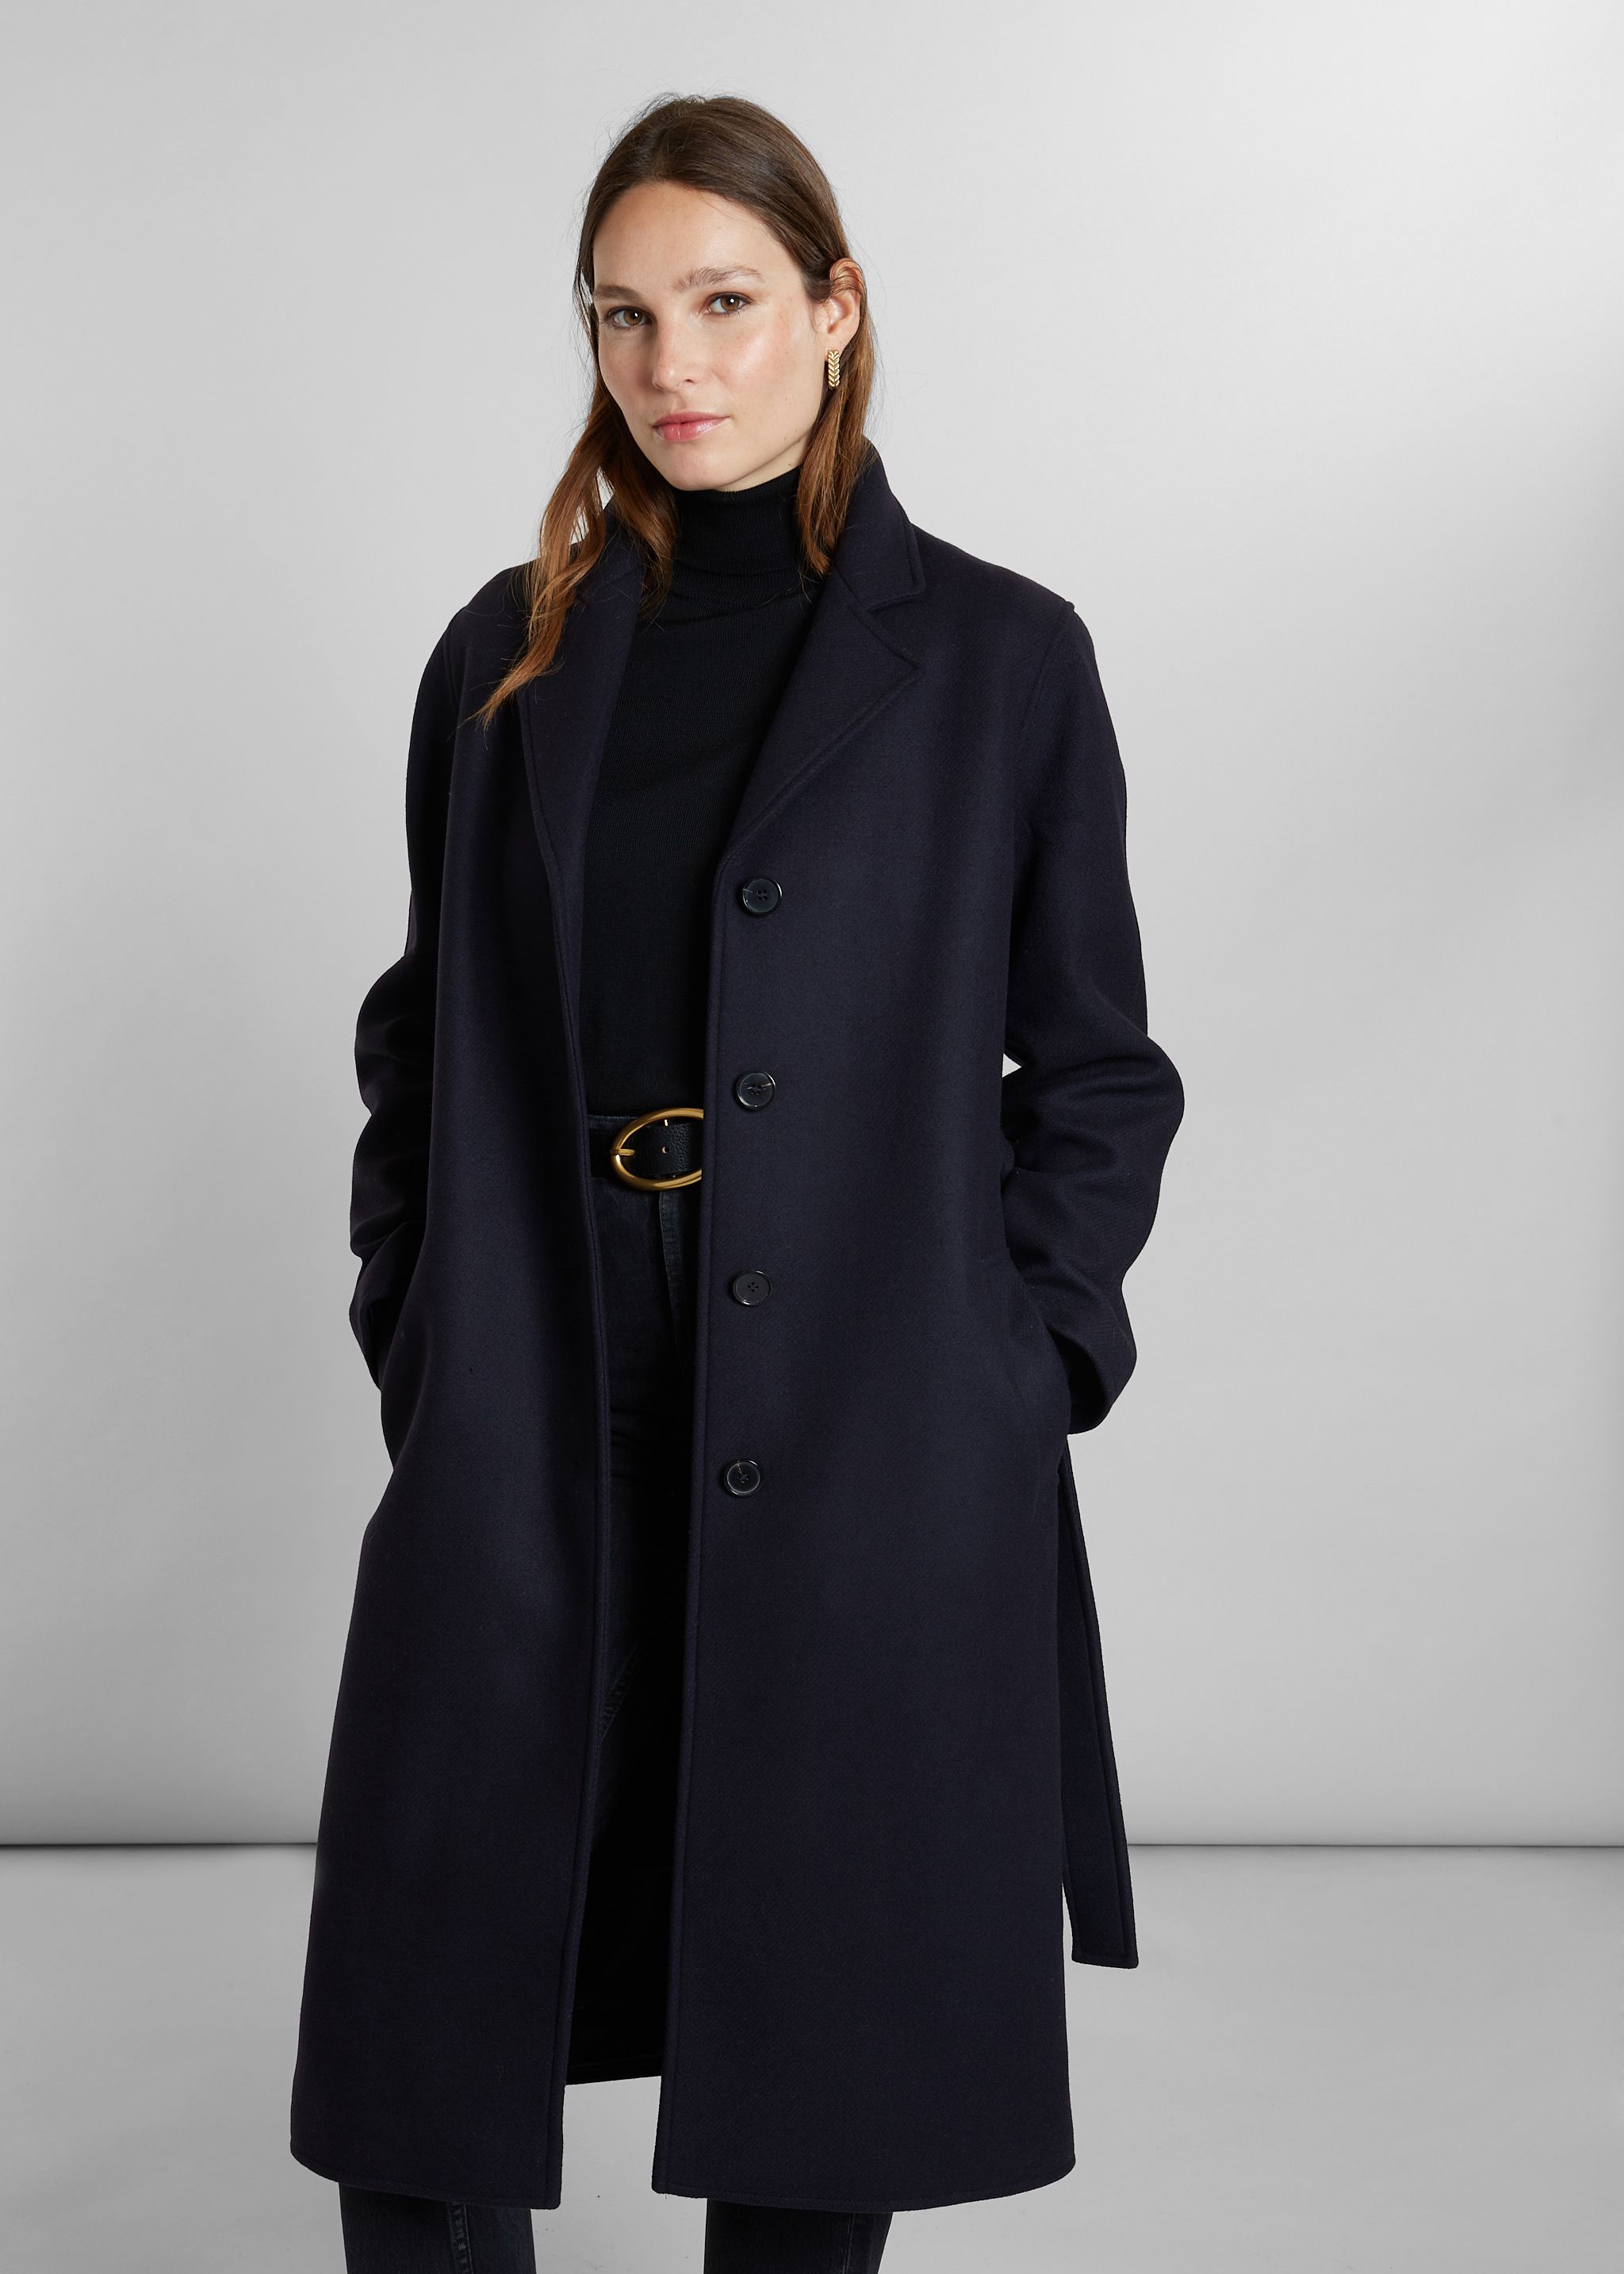 Straight belted overcoat made in France - L'Exception Paris